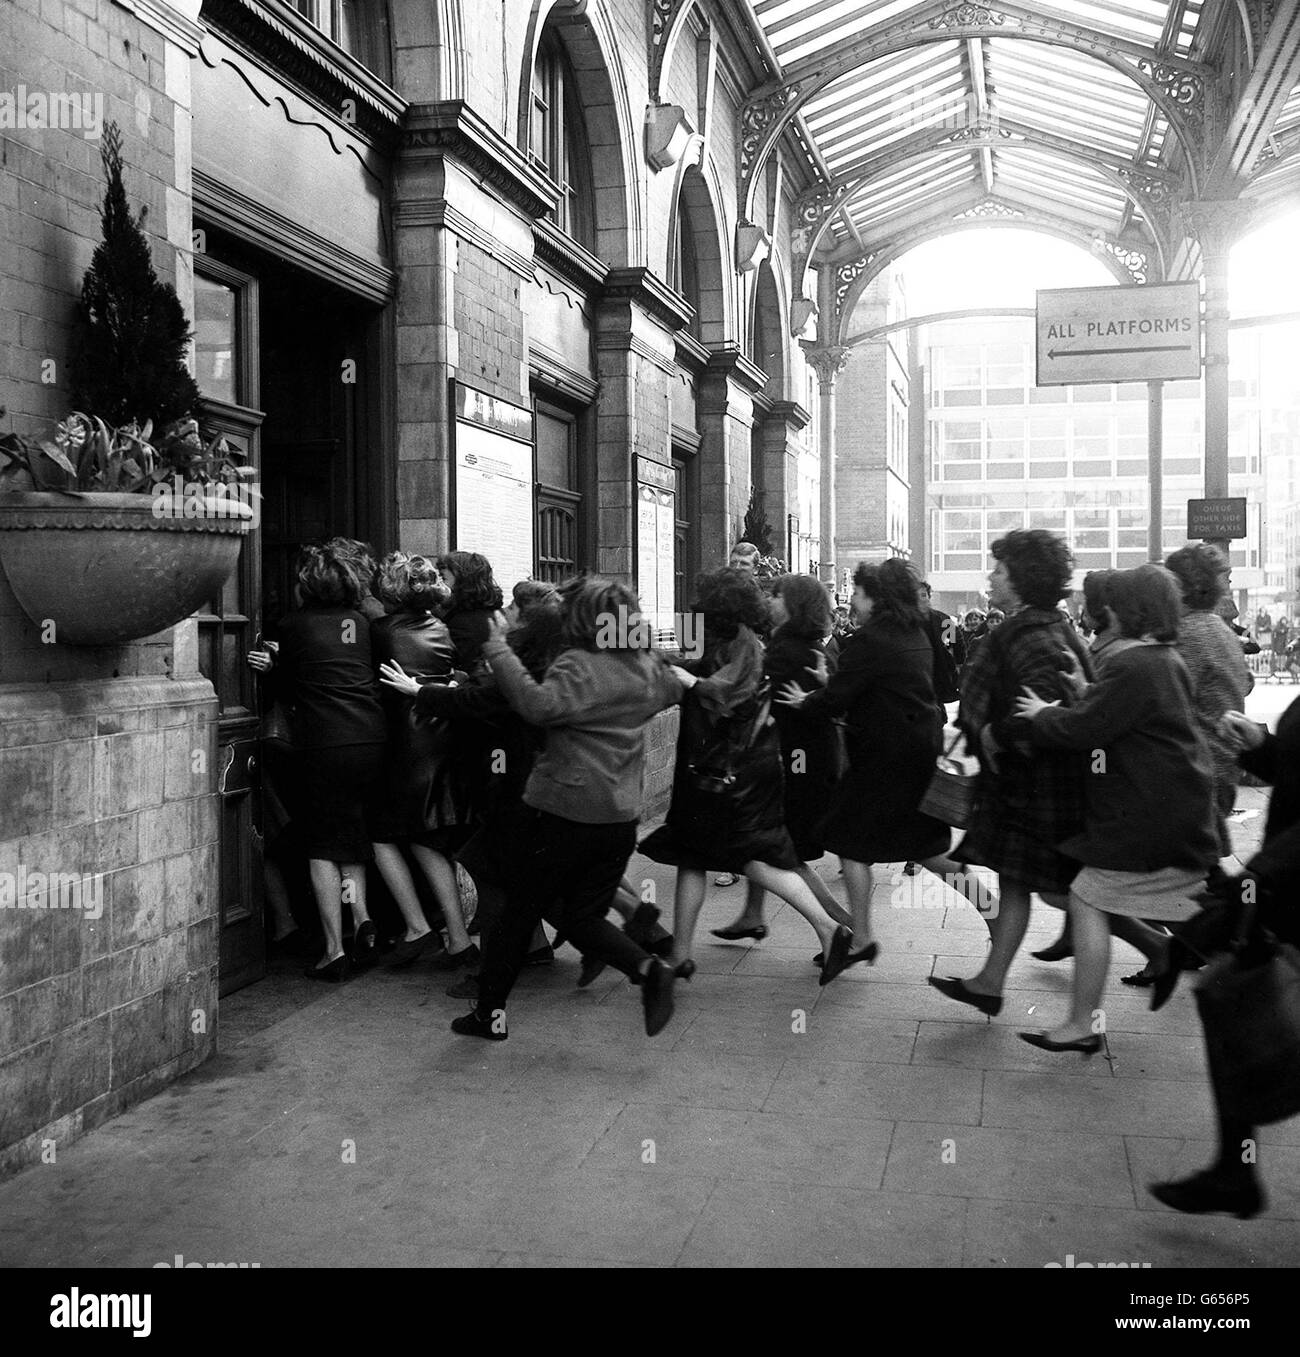 Beatles fans in film chase at Marylbone Station Stock Photo